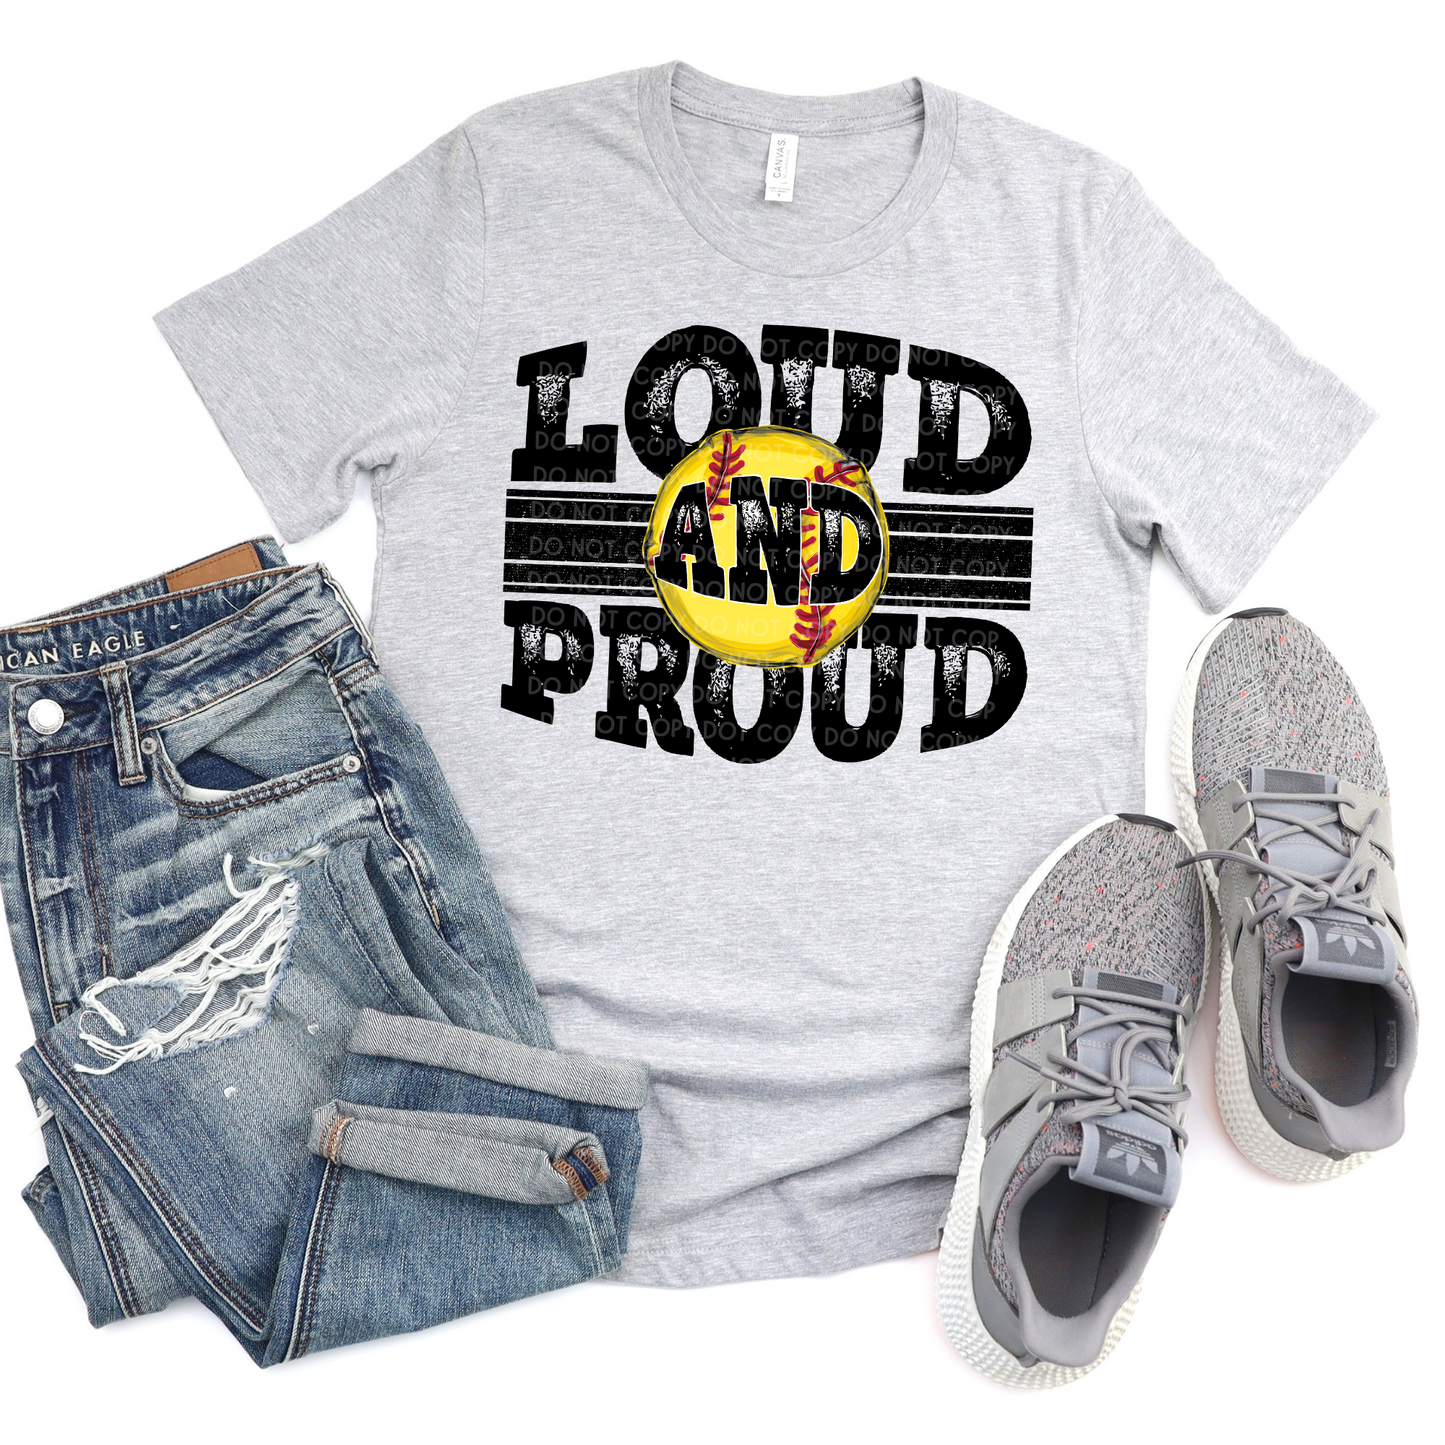 Softball Loud and Proud - DTF TRANSFER 0645